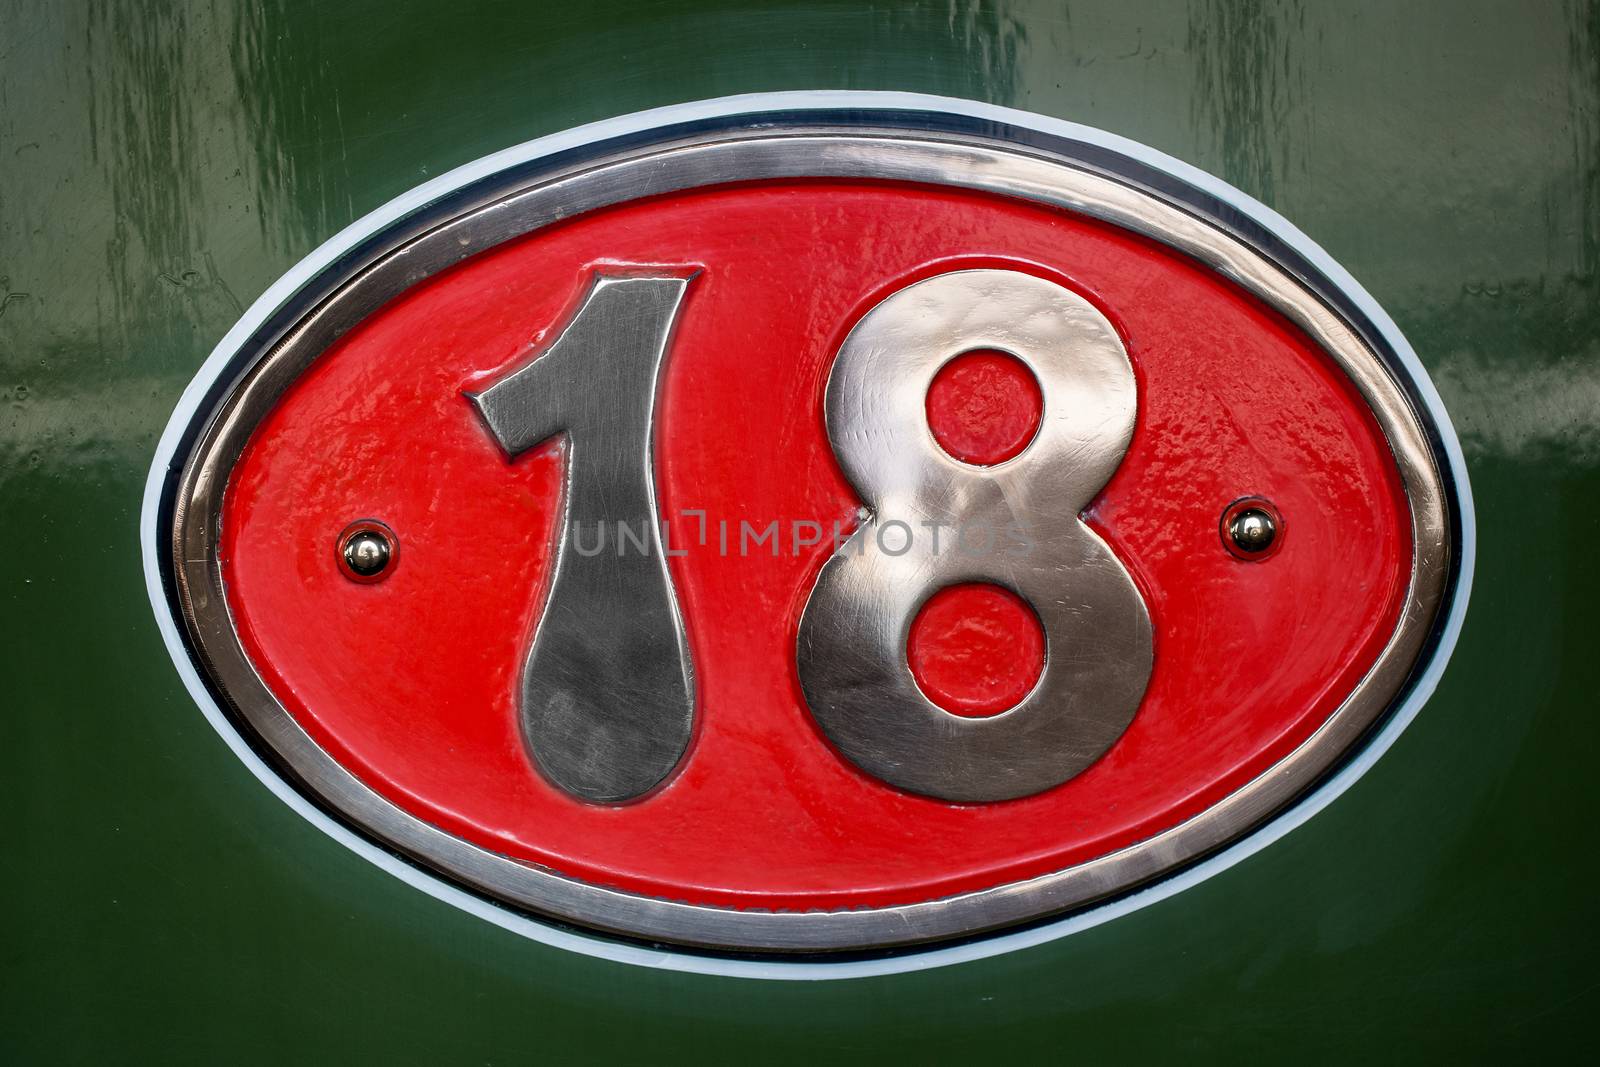 Plate with number eighteen, detail of an old metal plate with information and numbers